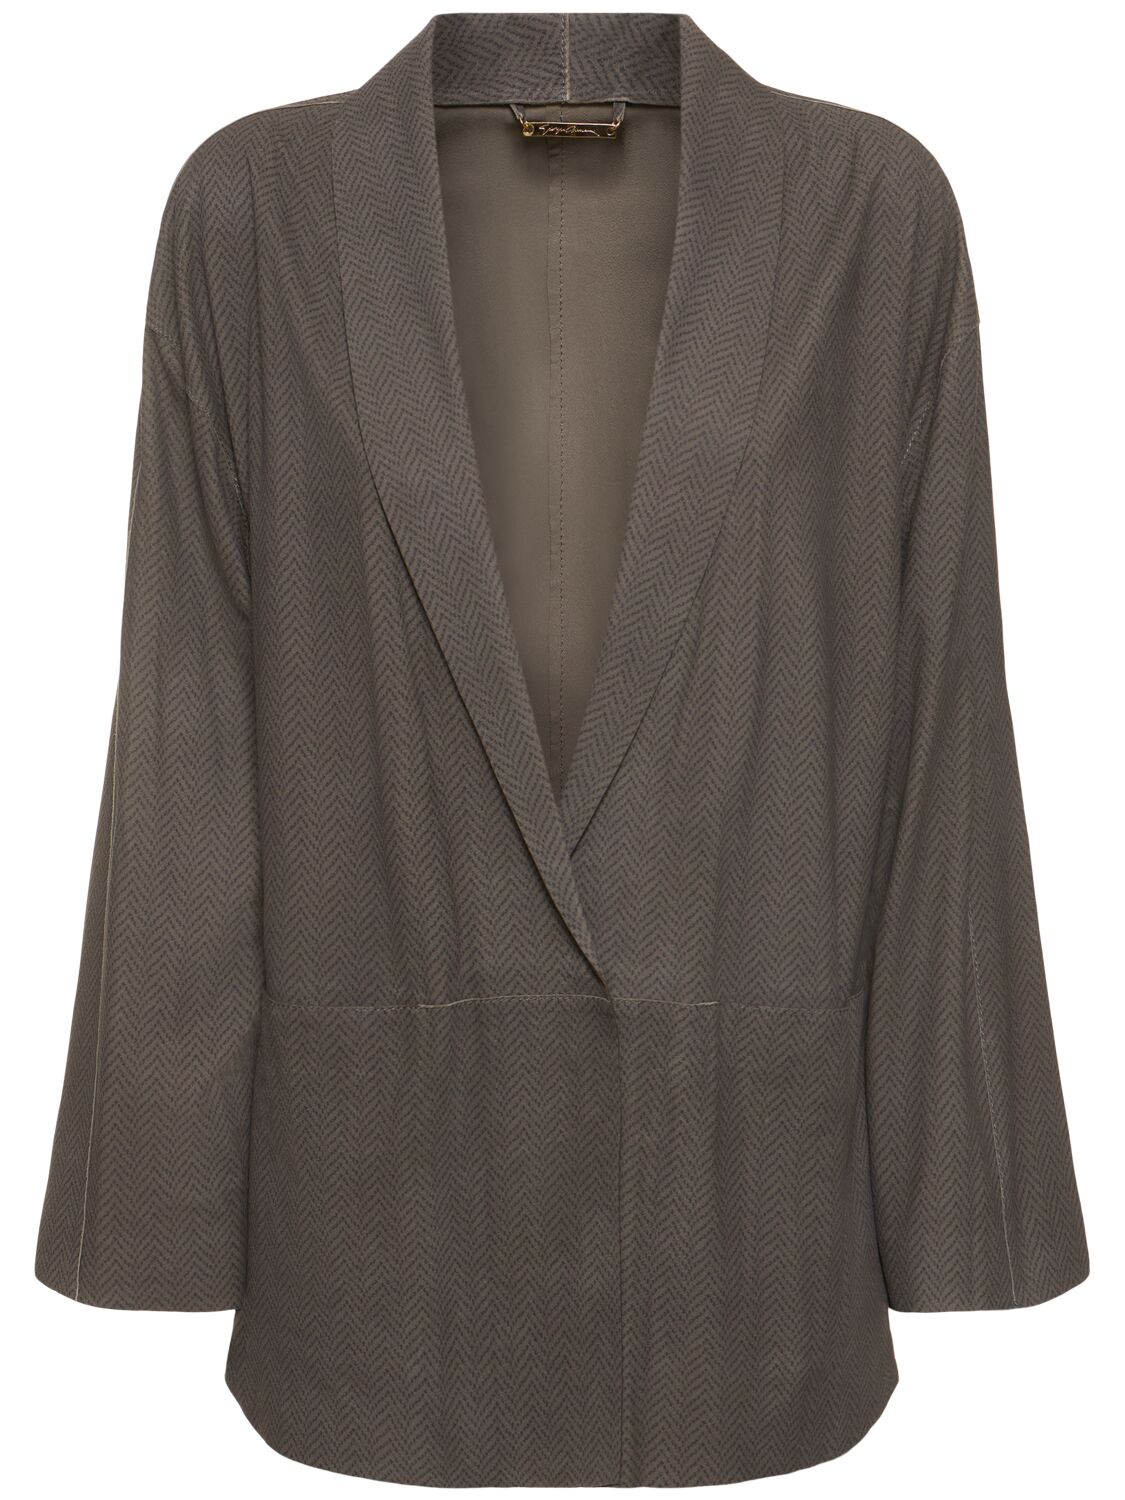 Giorgio Armani Single Breasted Suede Caban Jacket In Brown